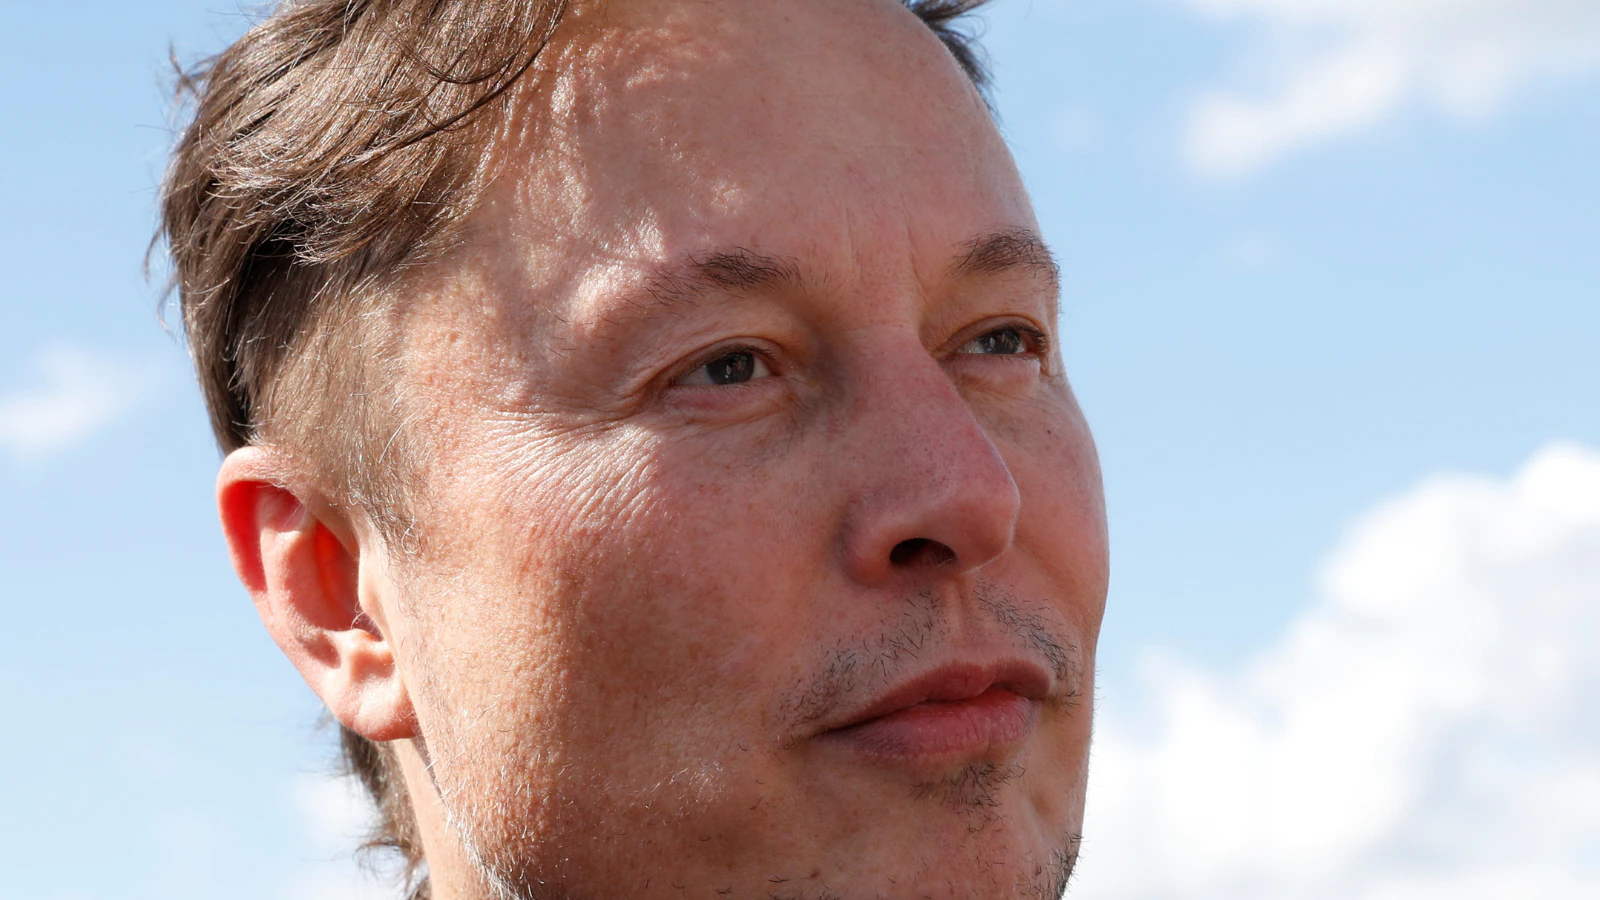 Elon Musk-Twitter: From Revealing Shareholding To Making Takeover Bid, Know Events So Far